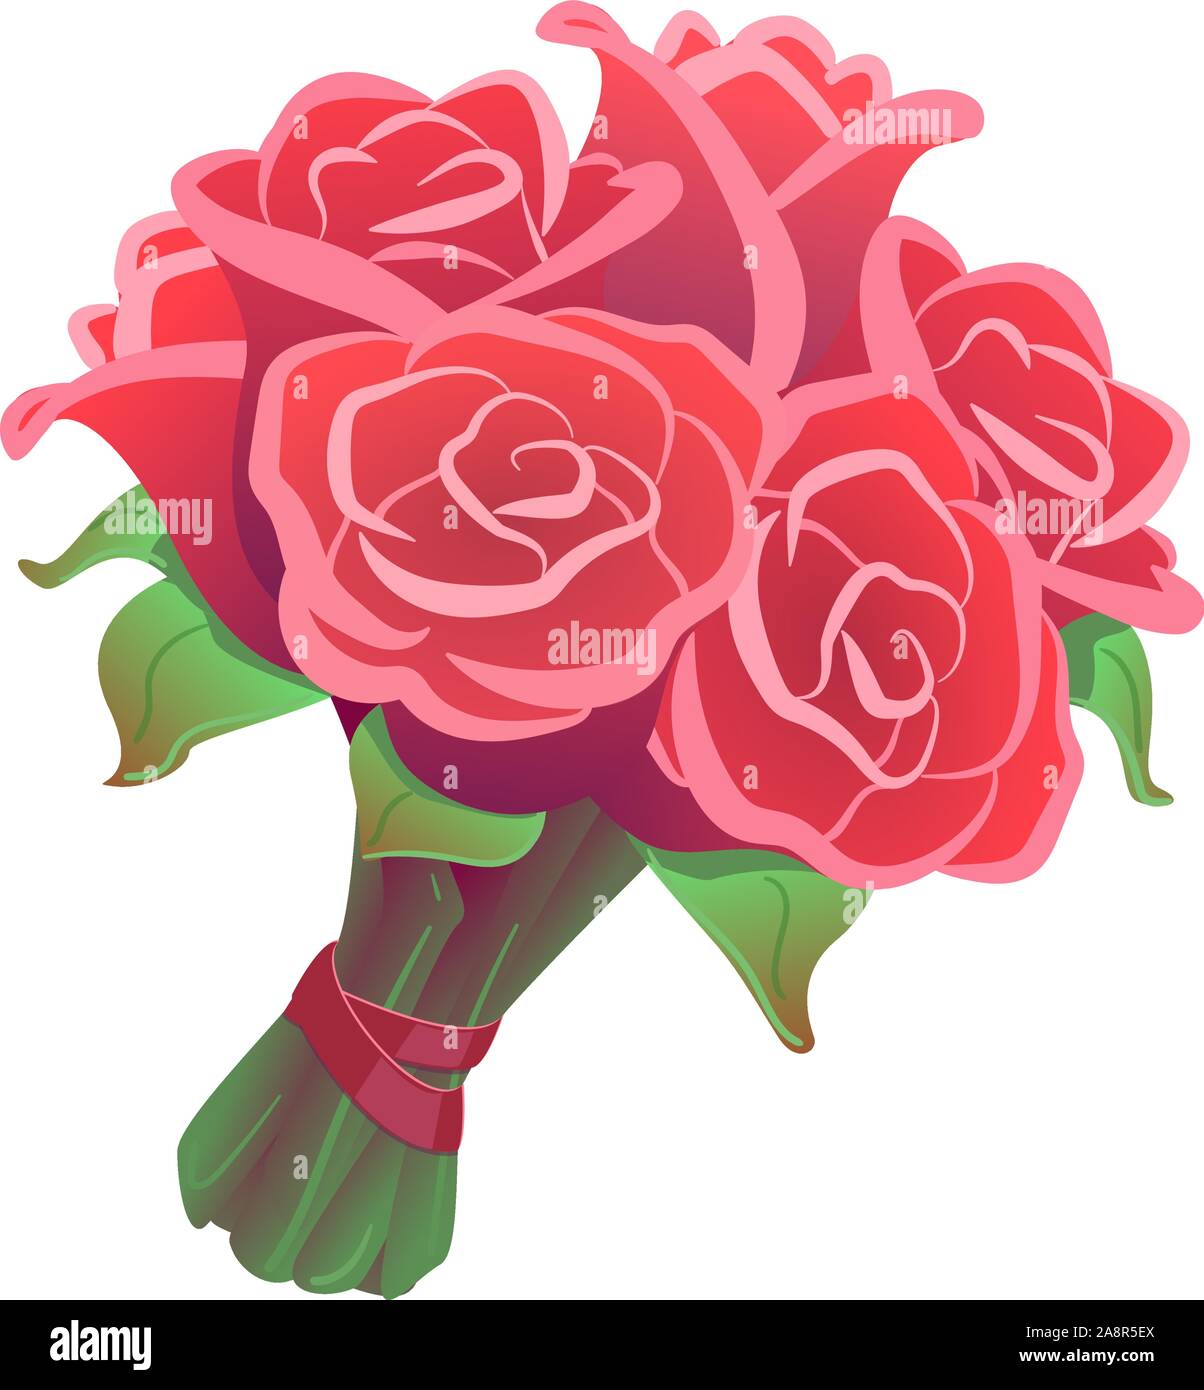 Rose bouquet on isolated white background. Flowers clipart for date, celebration, valentines day. Romantic Wedding gift illustration. Pink, rosy bunch with red ribbon. Closeup Floral drawing vector. Stock Vector